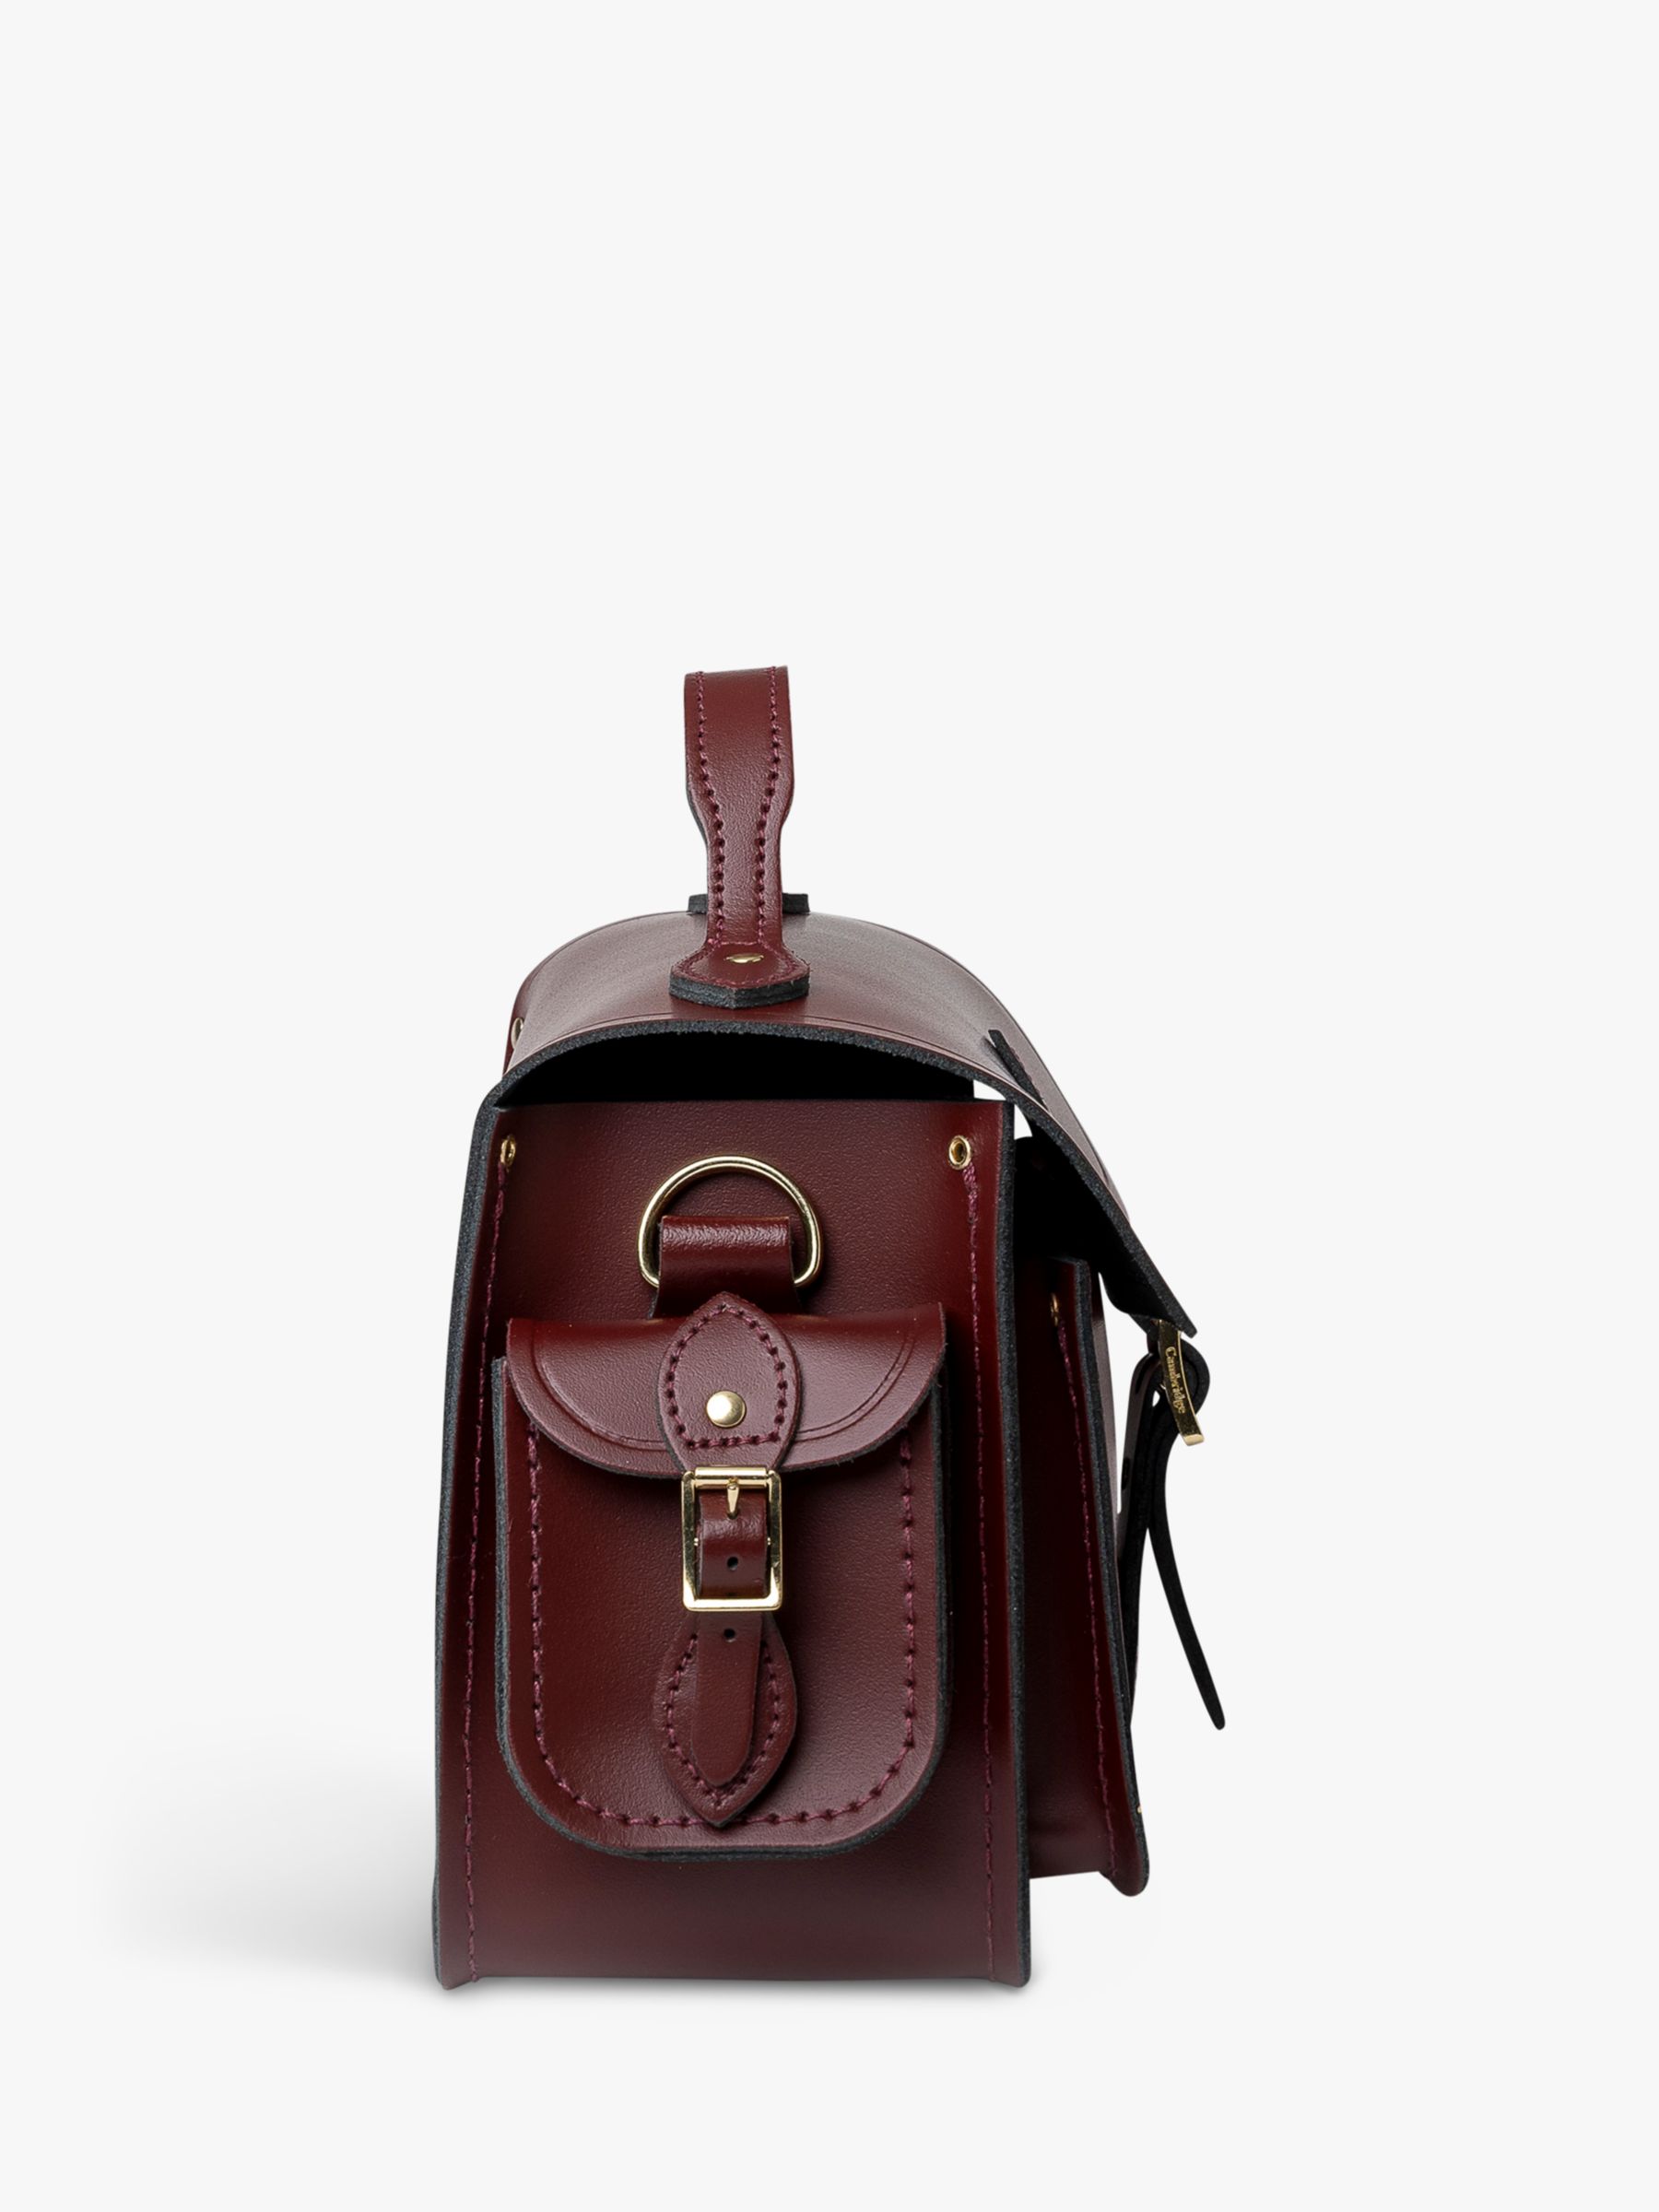 Buy Cambridge Satchel The Small Traveller Leather Bag Online at johnlewis.com